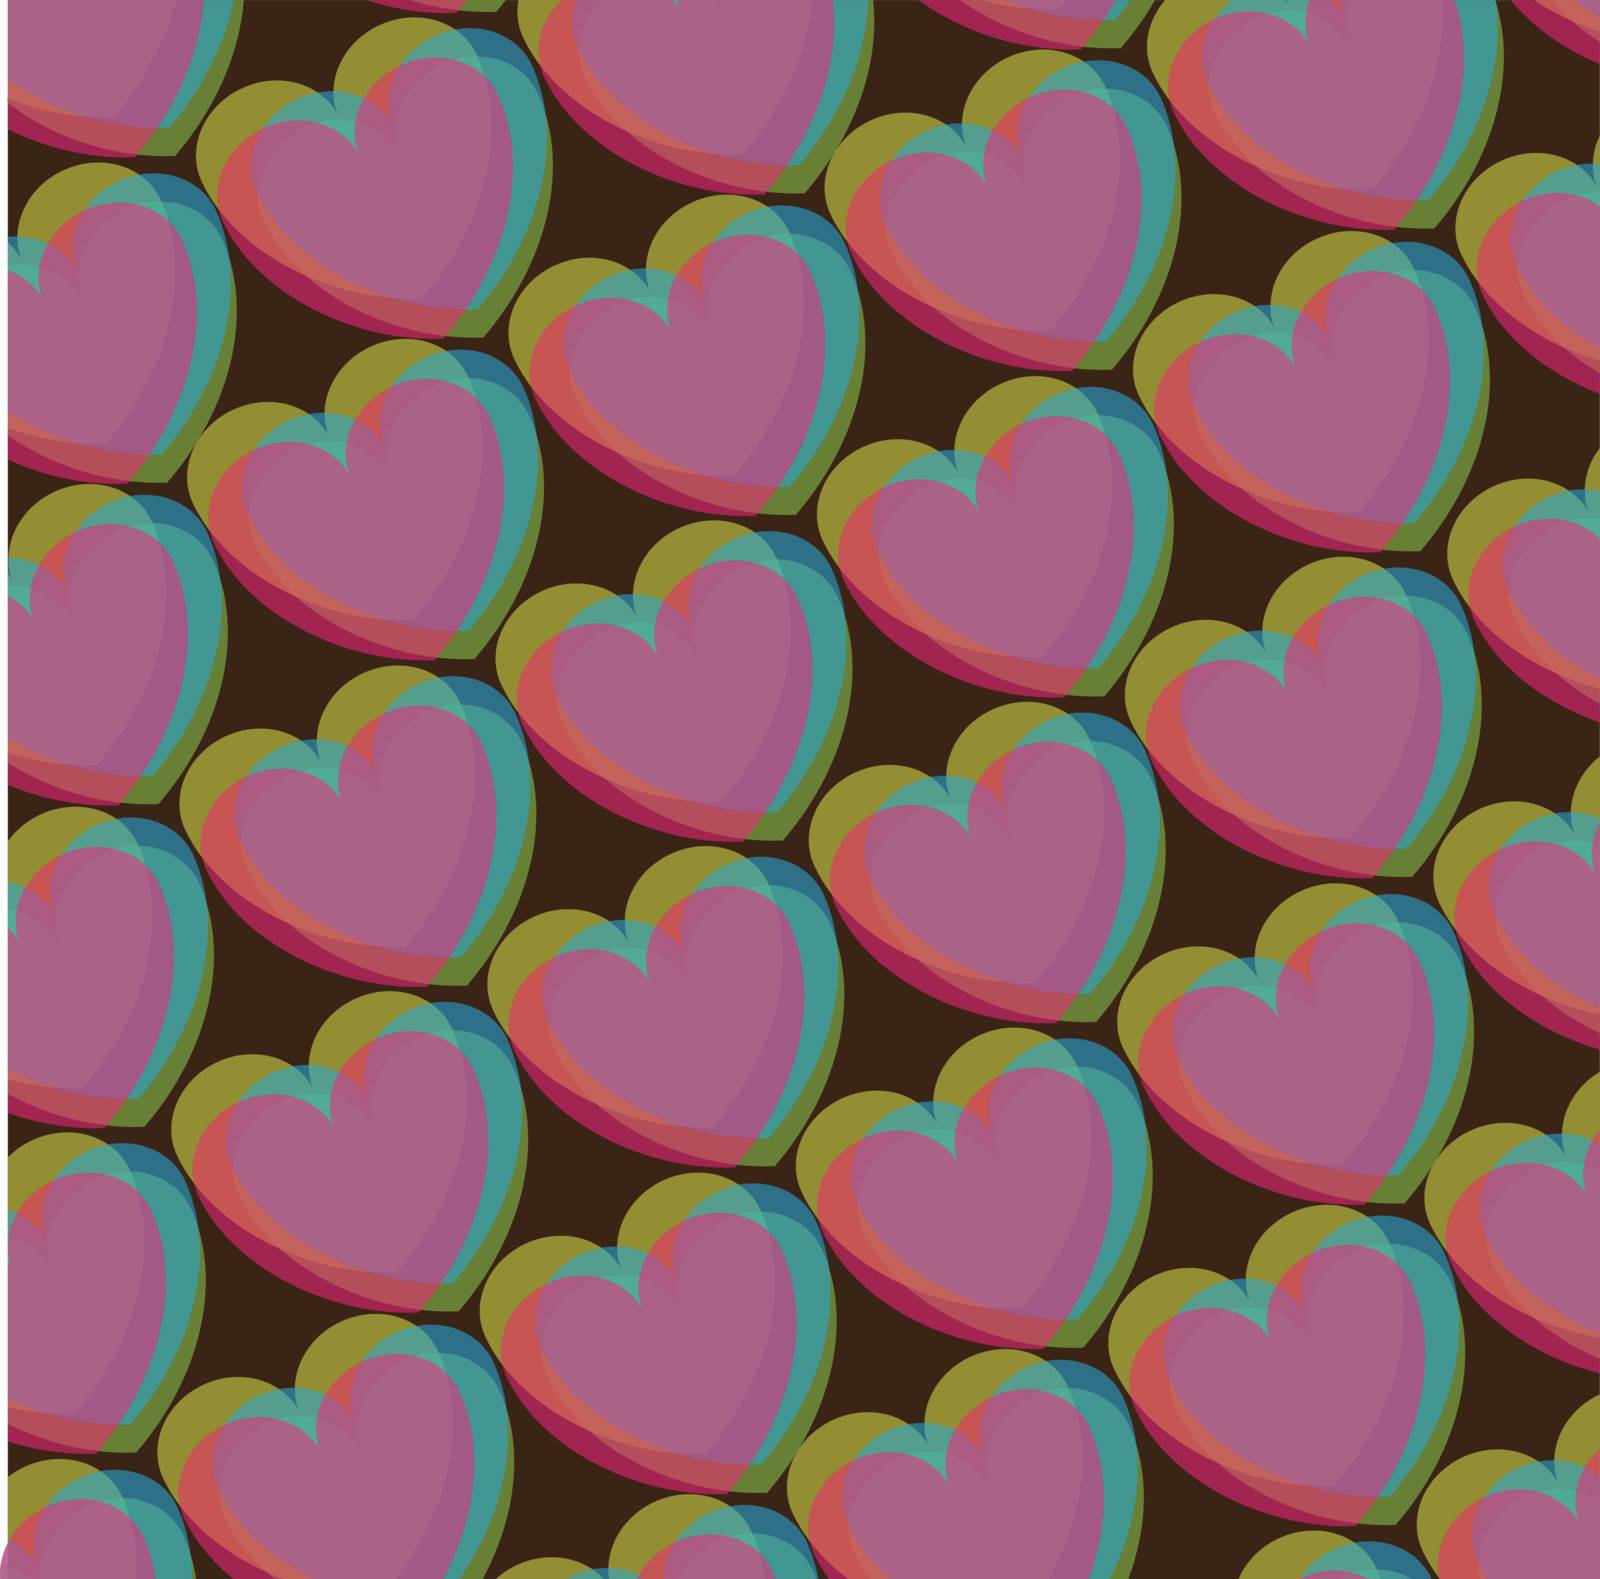 retro background with hearts by catrinel